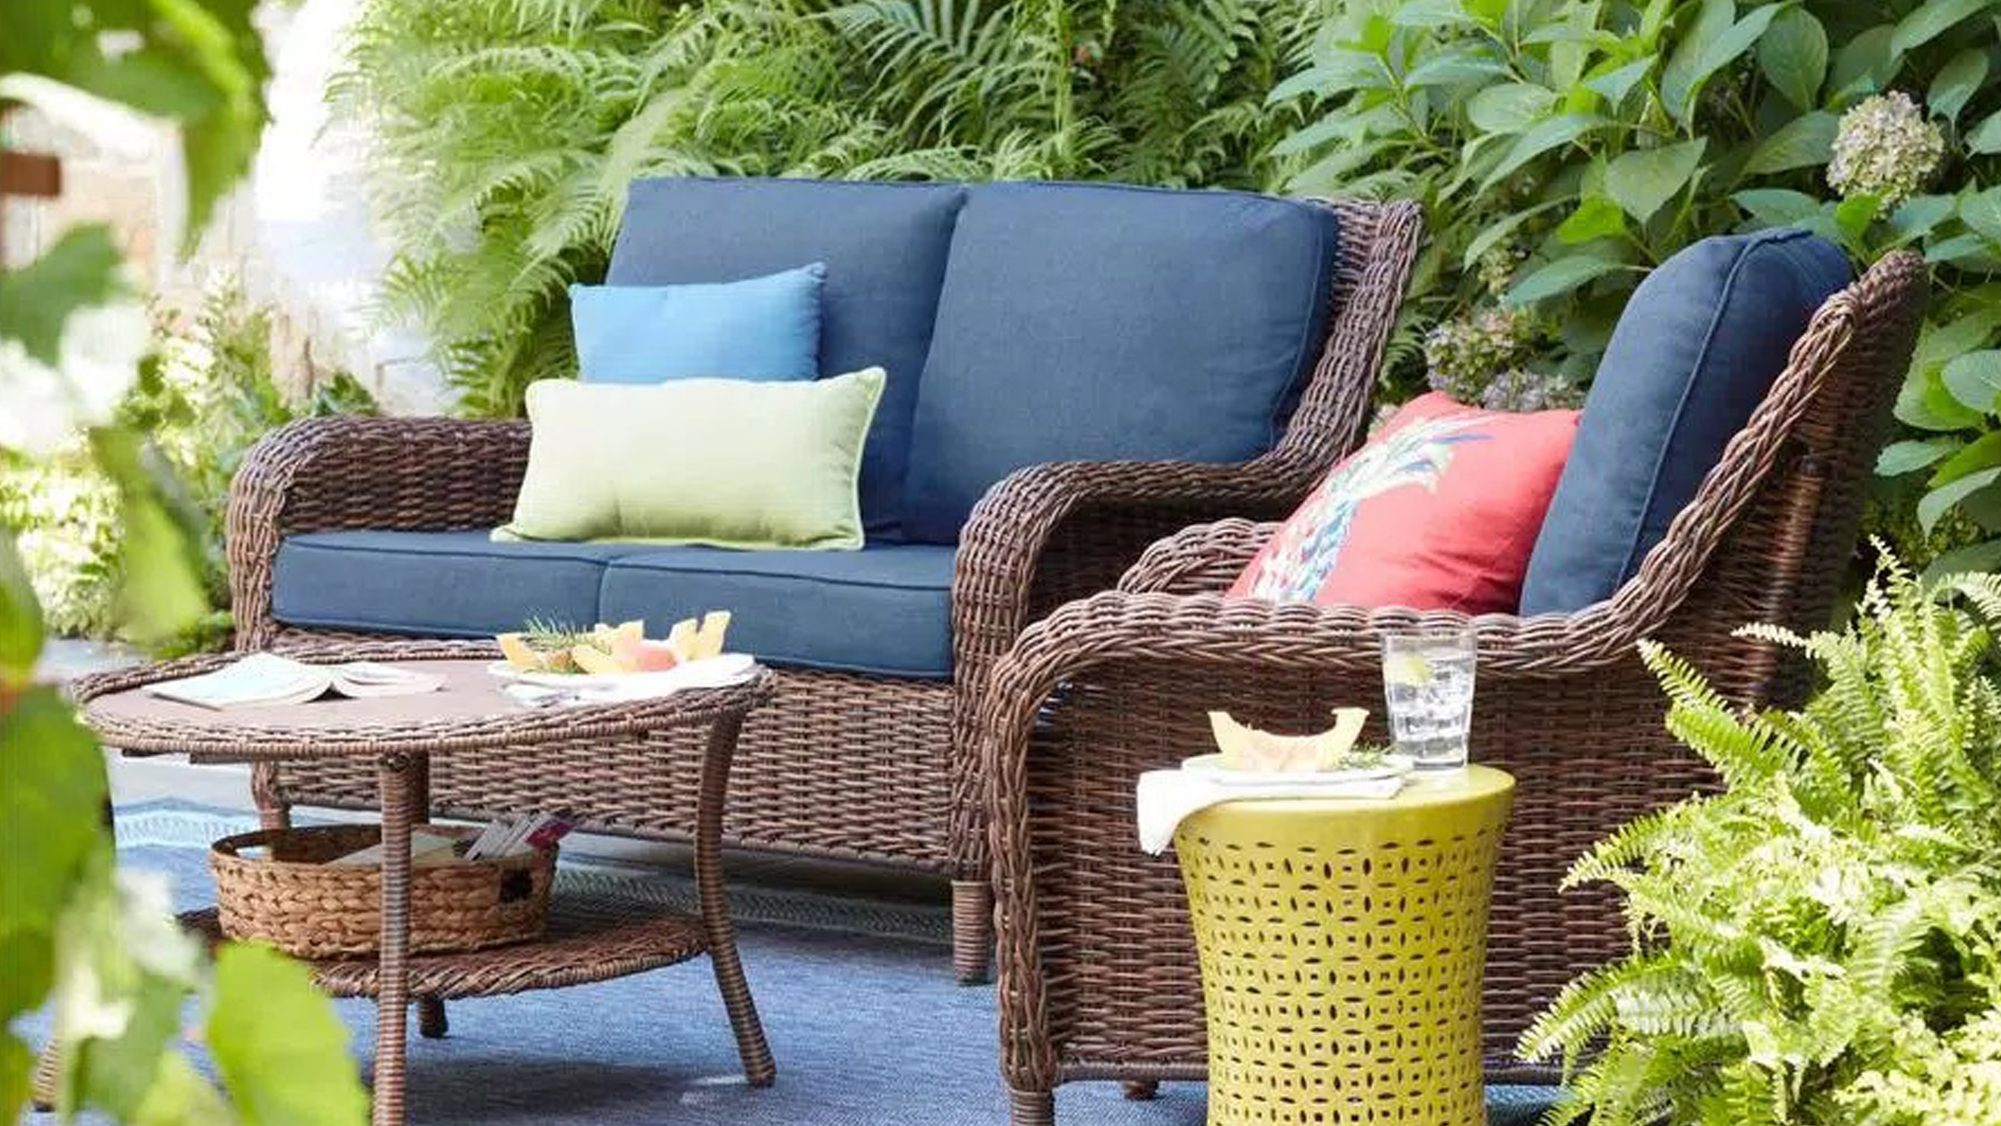 The 5 Best Outdoor Furniture Sets